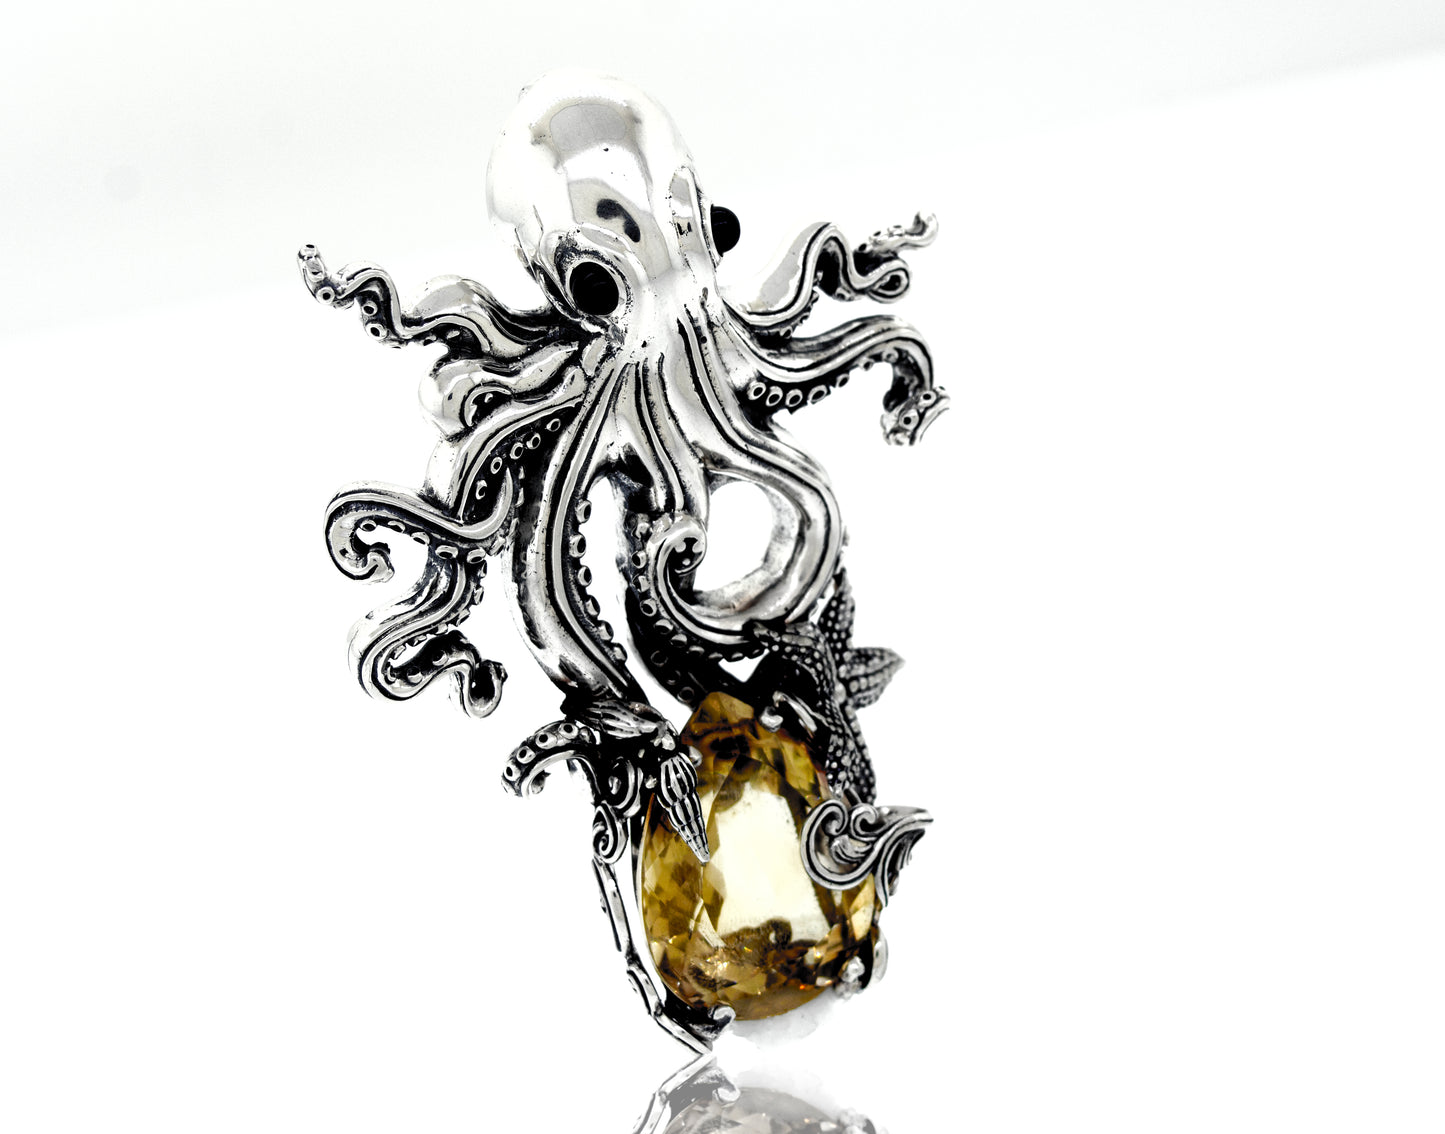 A Super Silver designer handmade octopus pendant with vibrant citrine crystal, featuring mesmerizing onyx eyes and a vibrant citrine stone.